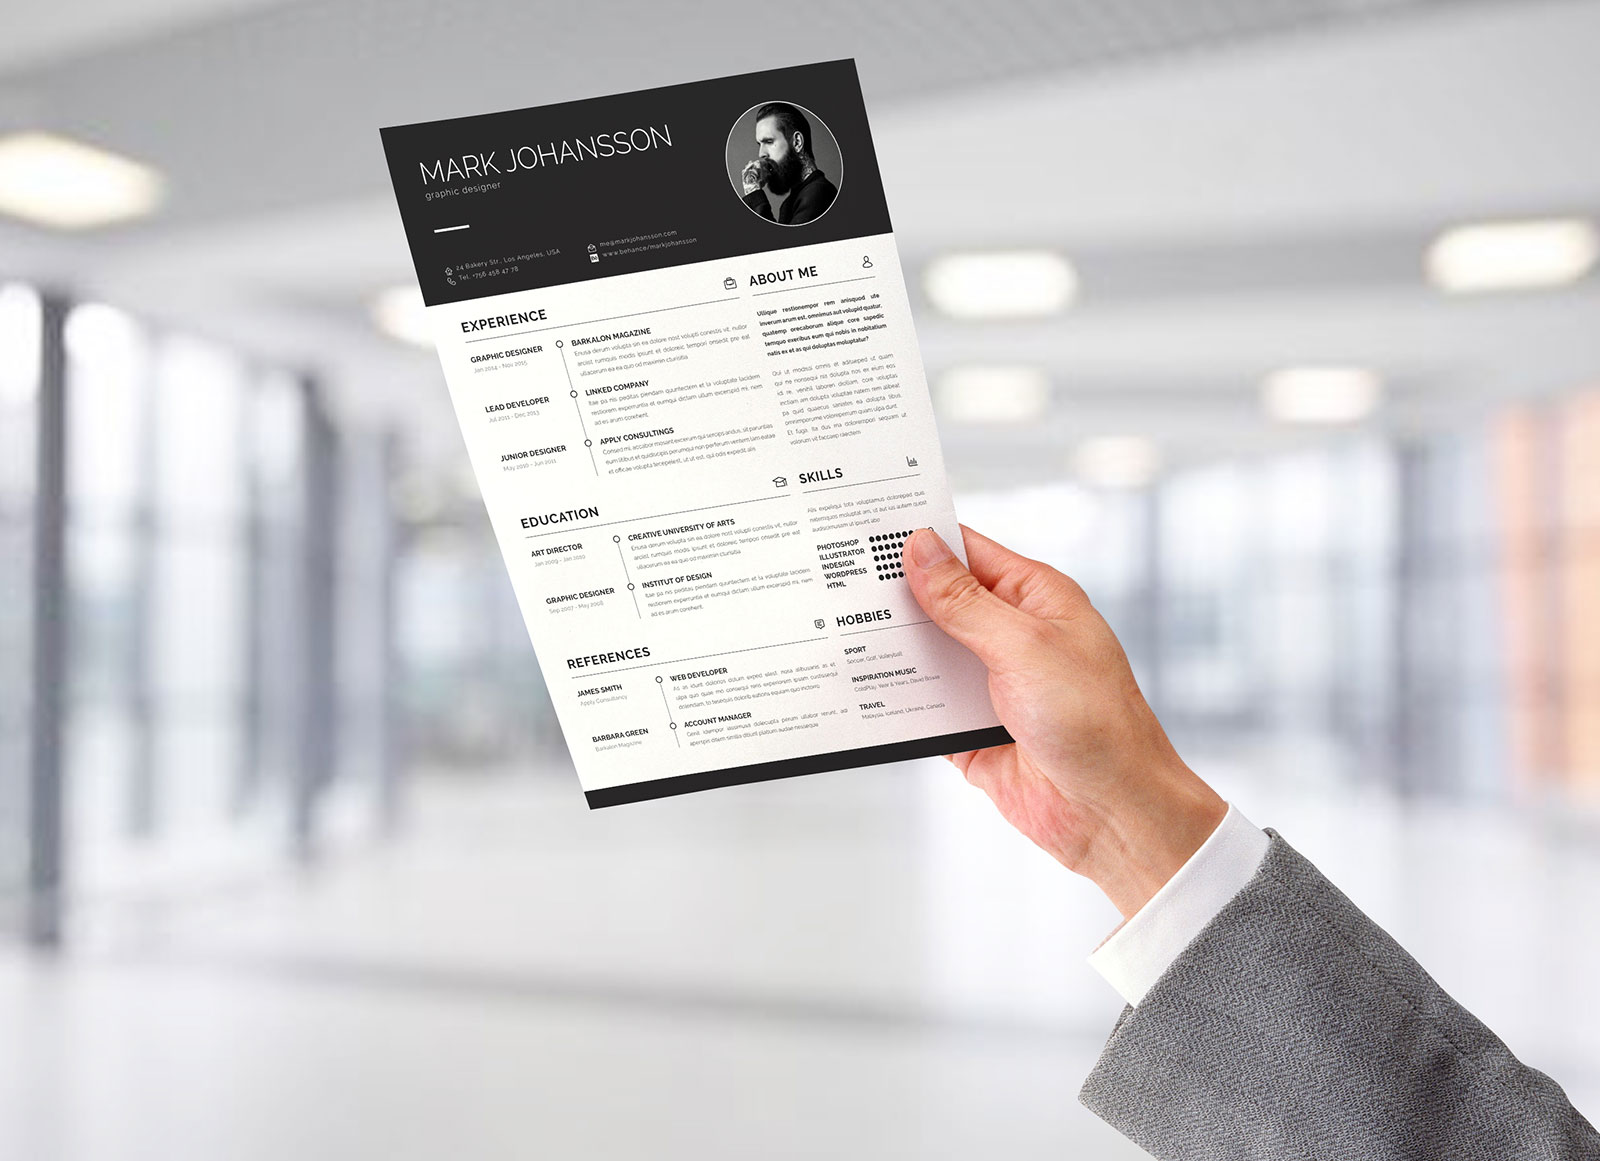 Free A4 Resume Flyer in Male Hand Mockup PSD